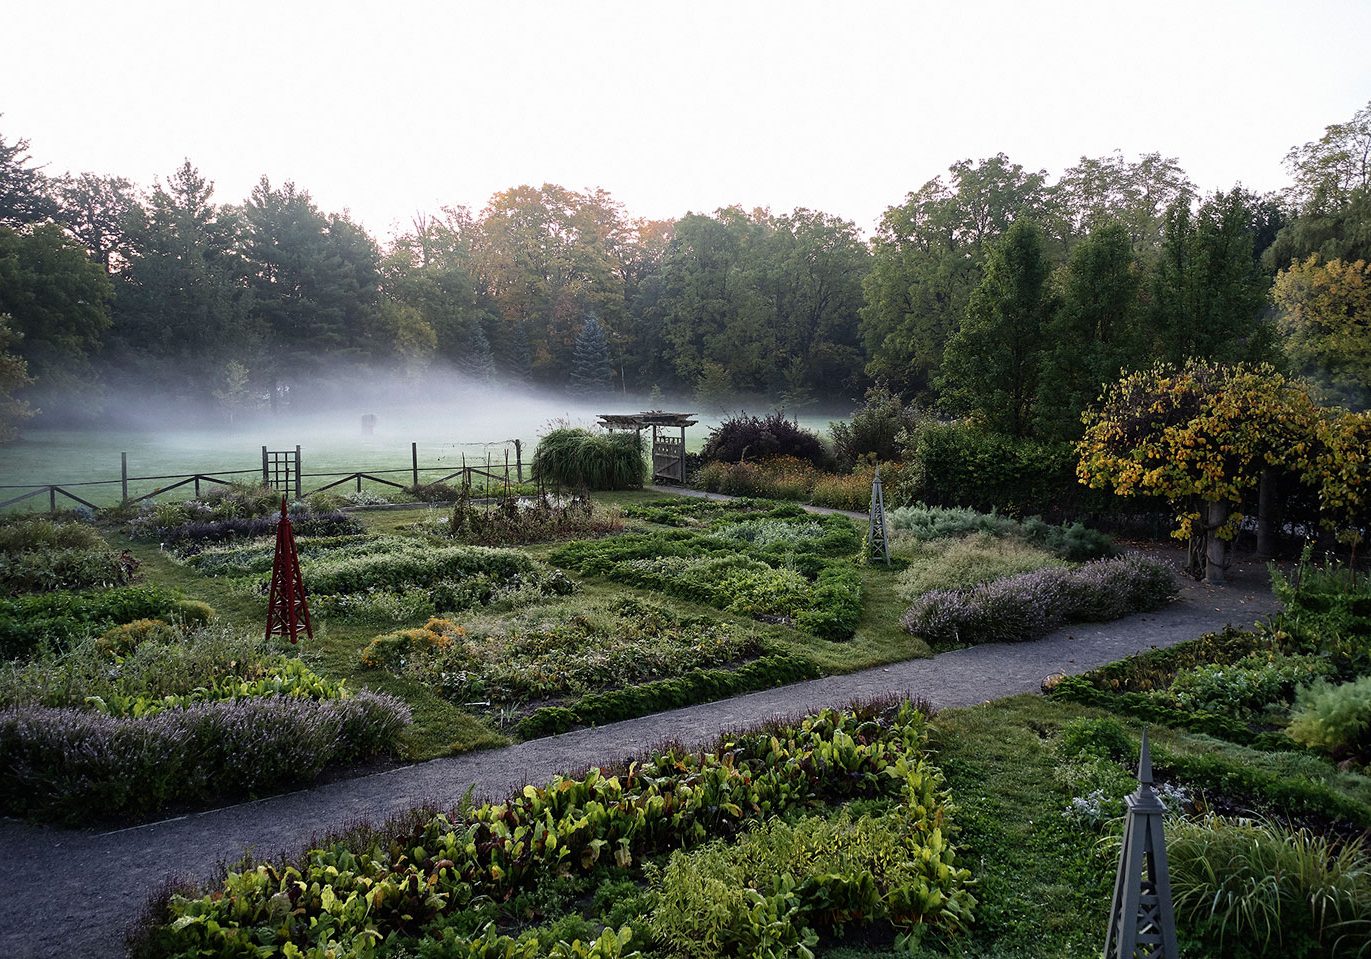 A View of the Gardens Covered In Mist